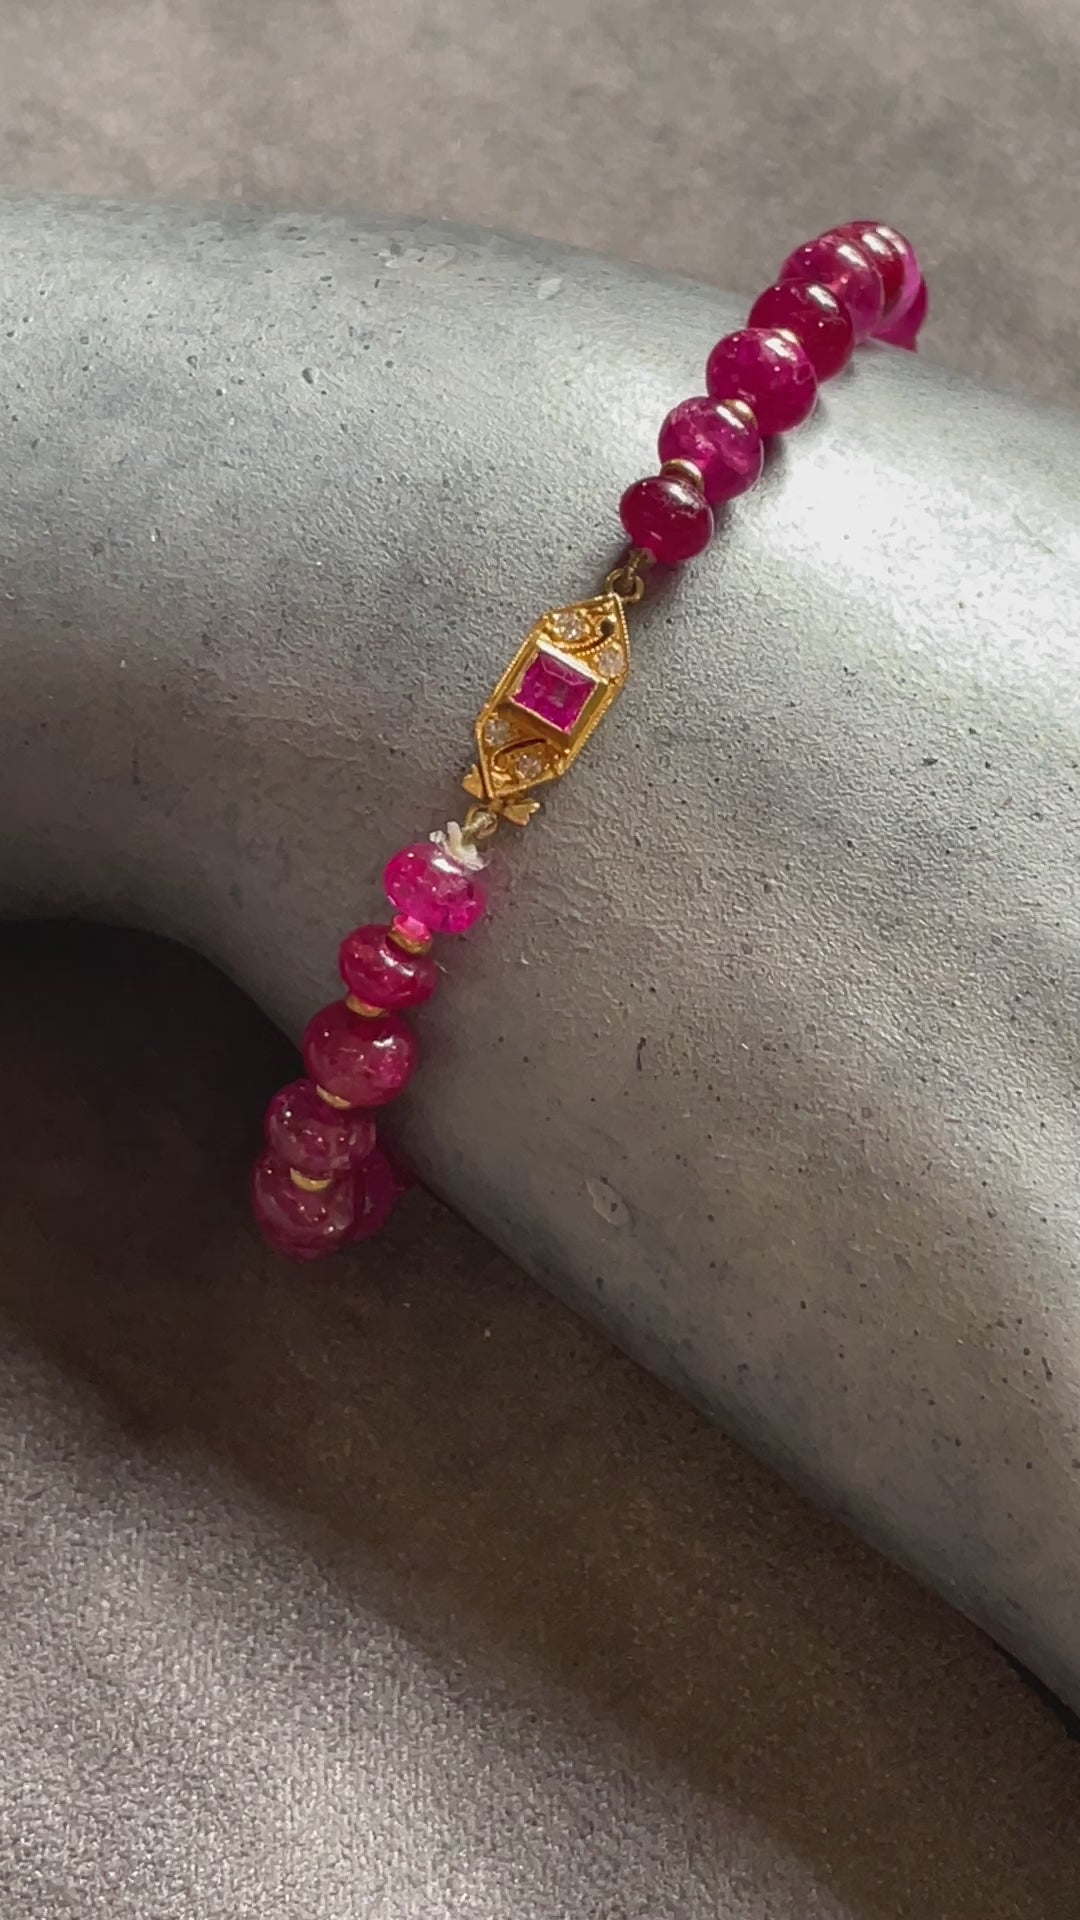 Precious and captivating gold bracelet with Burma no heat ruby and Victorian-style clasp